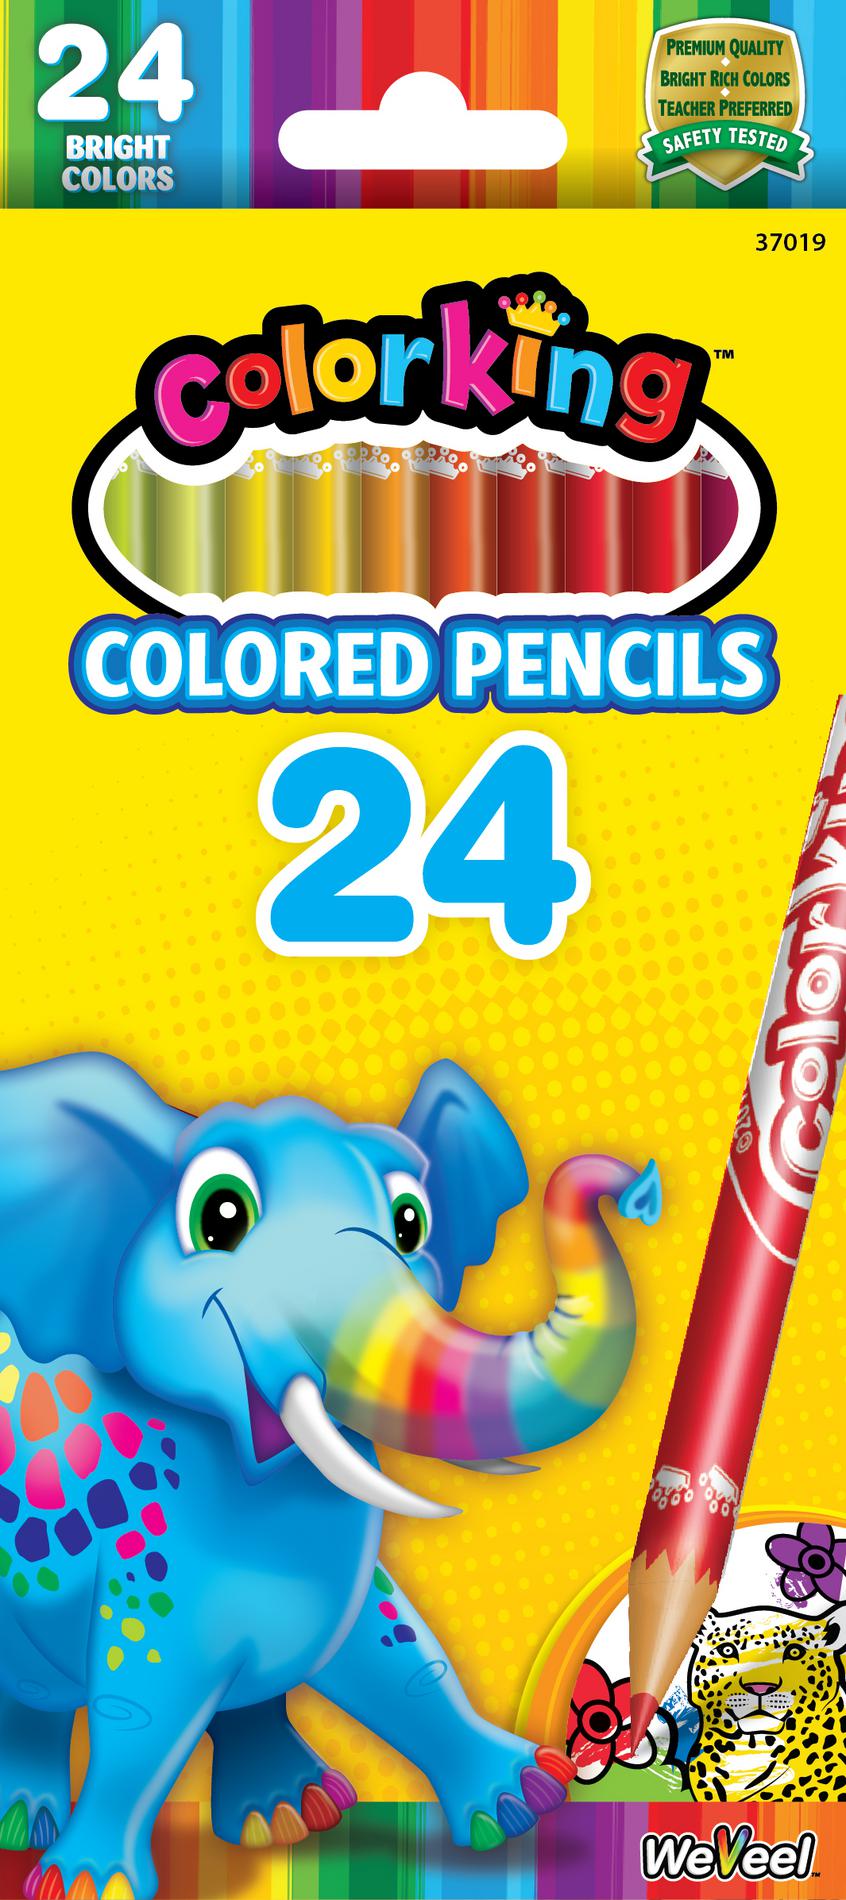 ColorKing 22-7224  Colored Pencils, 24 Count